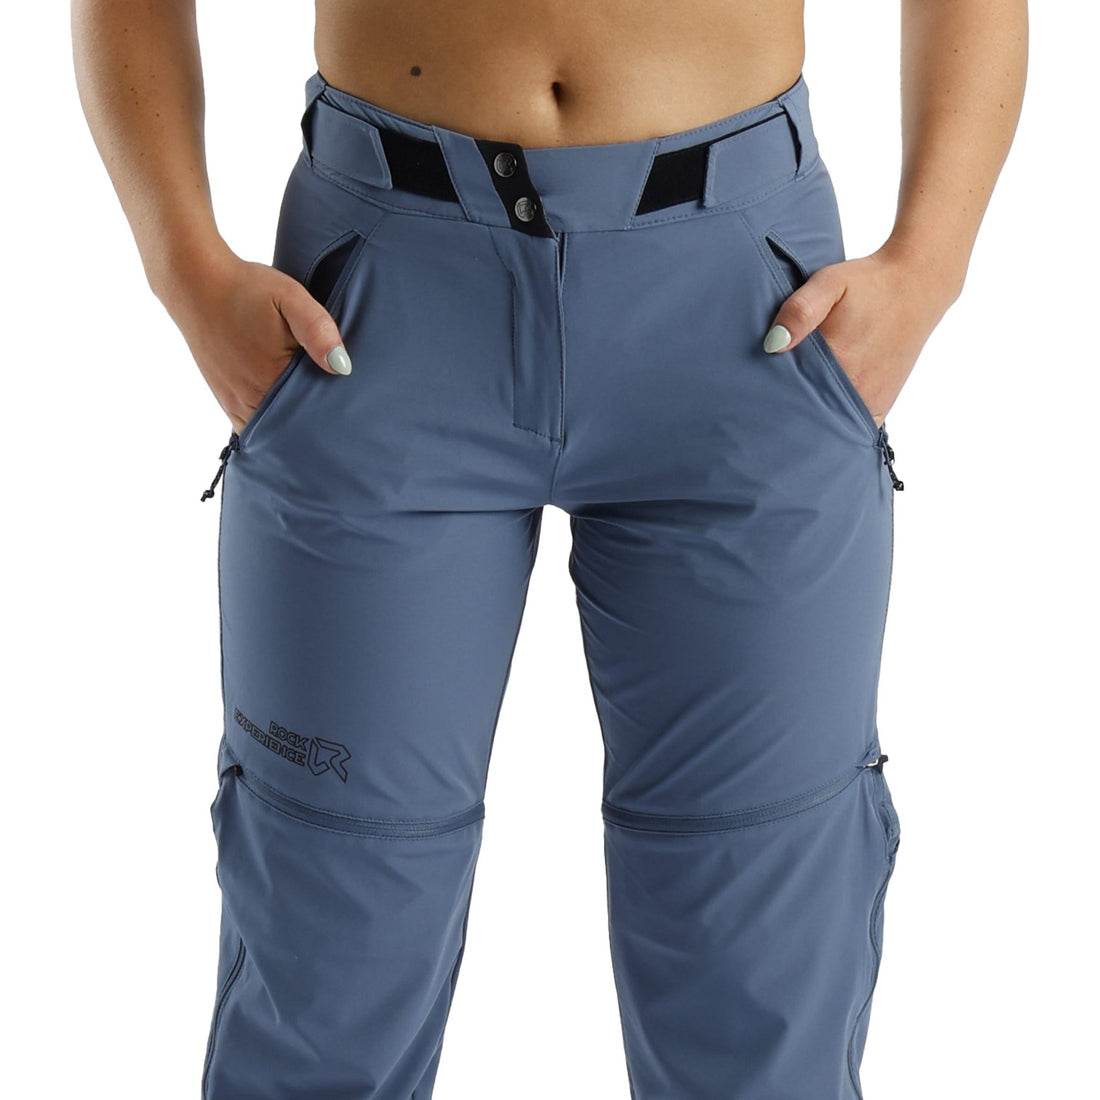 OBSERVER 2.0 T ZIP WOMAN PANT - World of Alps